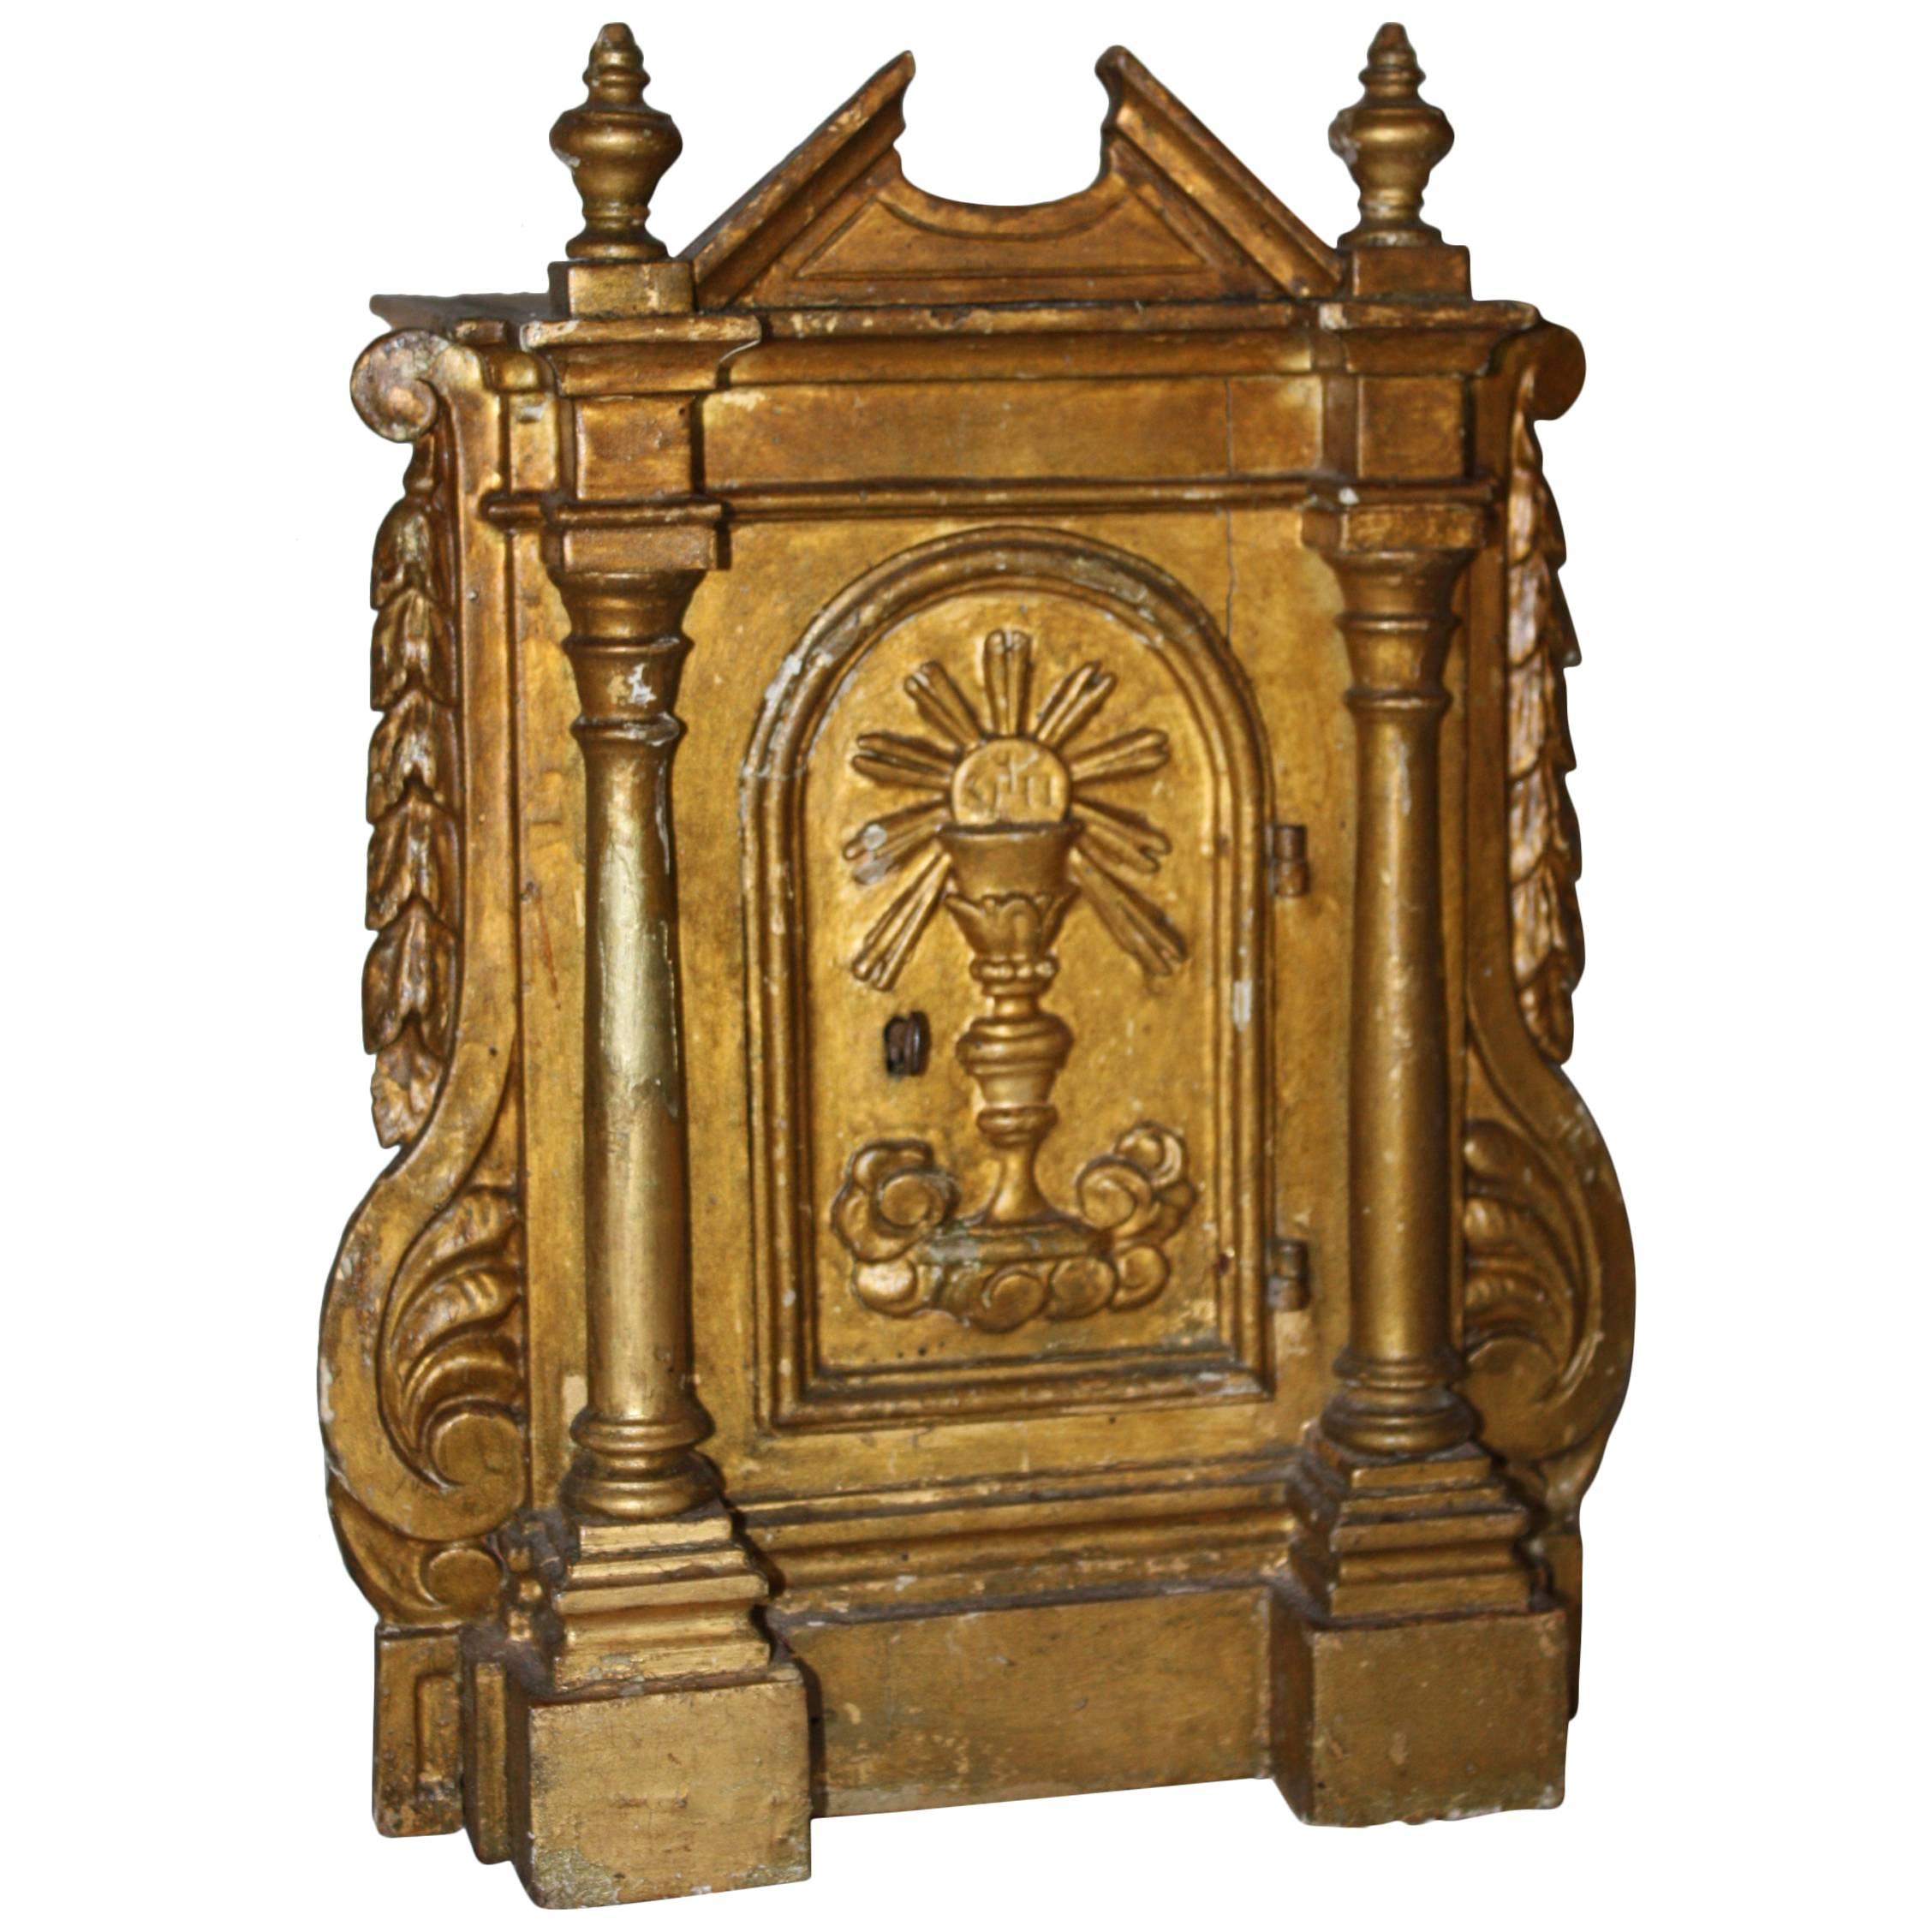 19th Century French Tabernacle